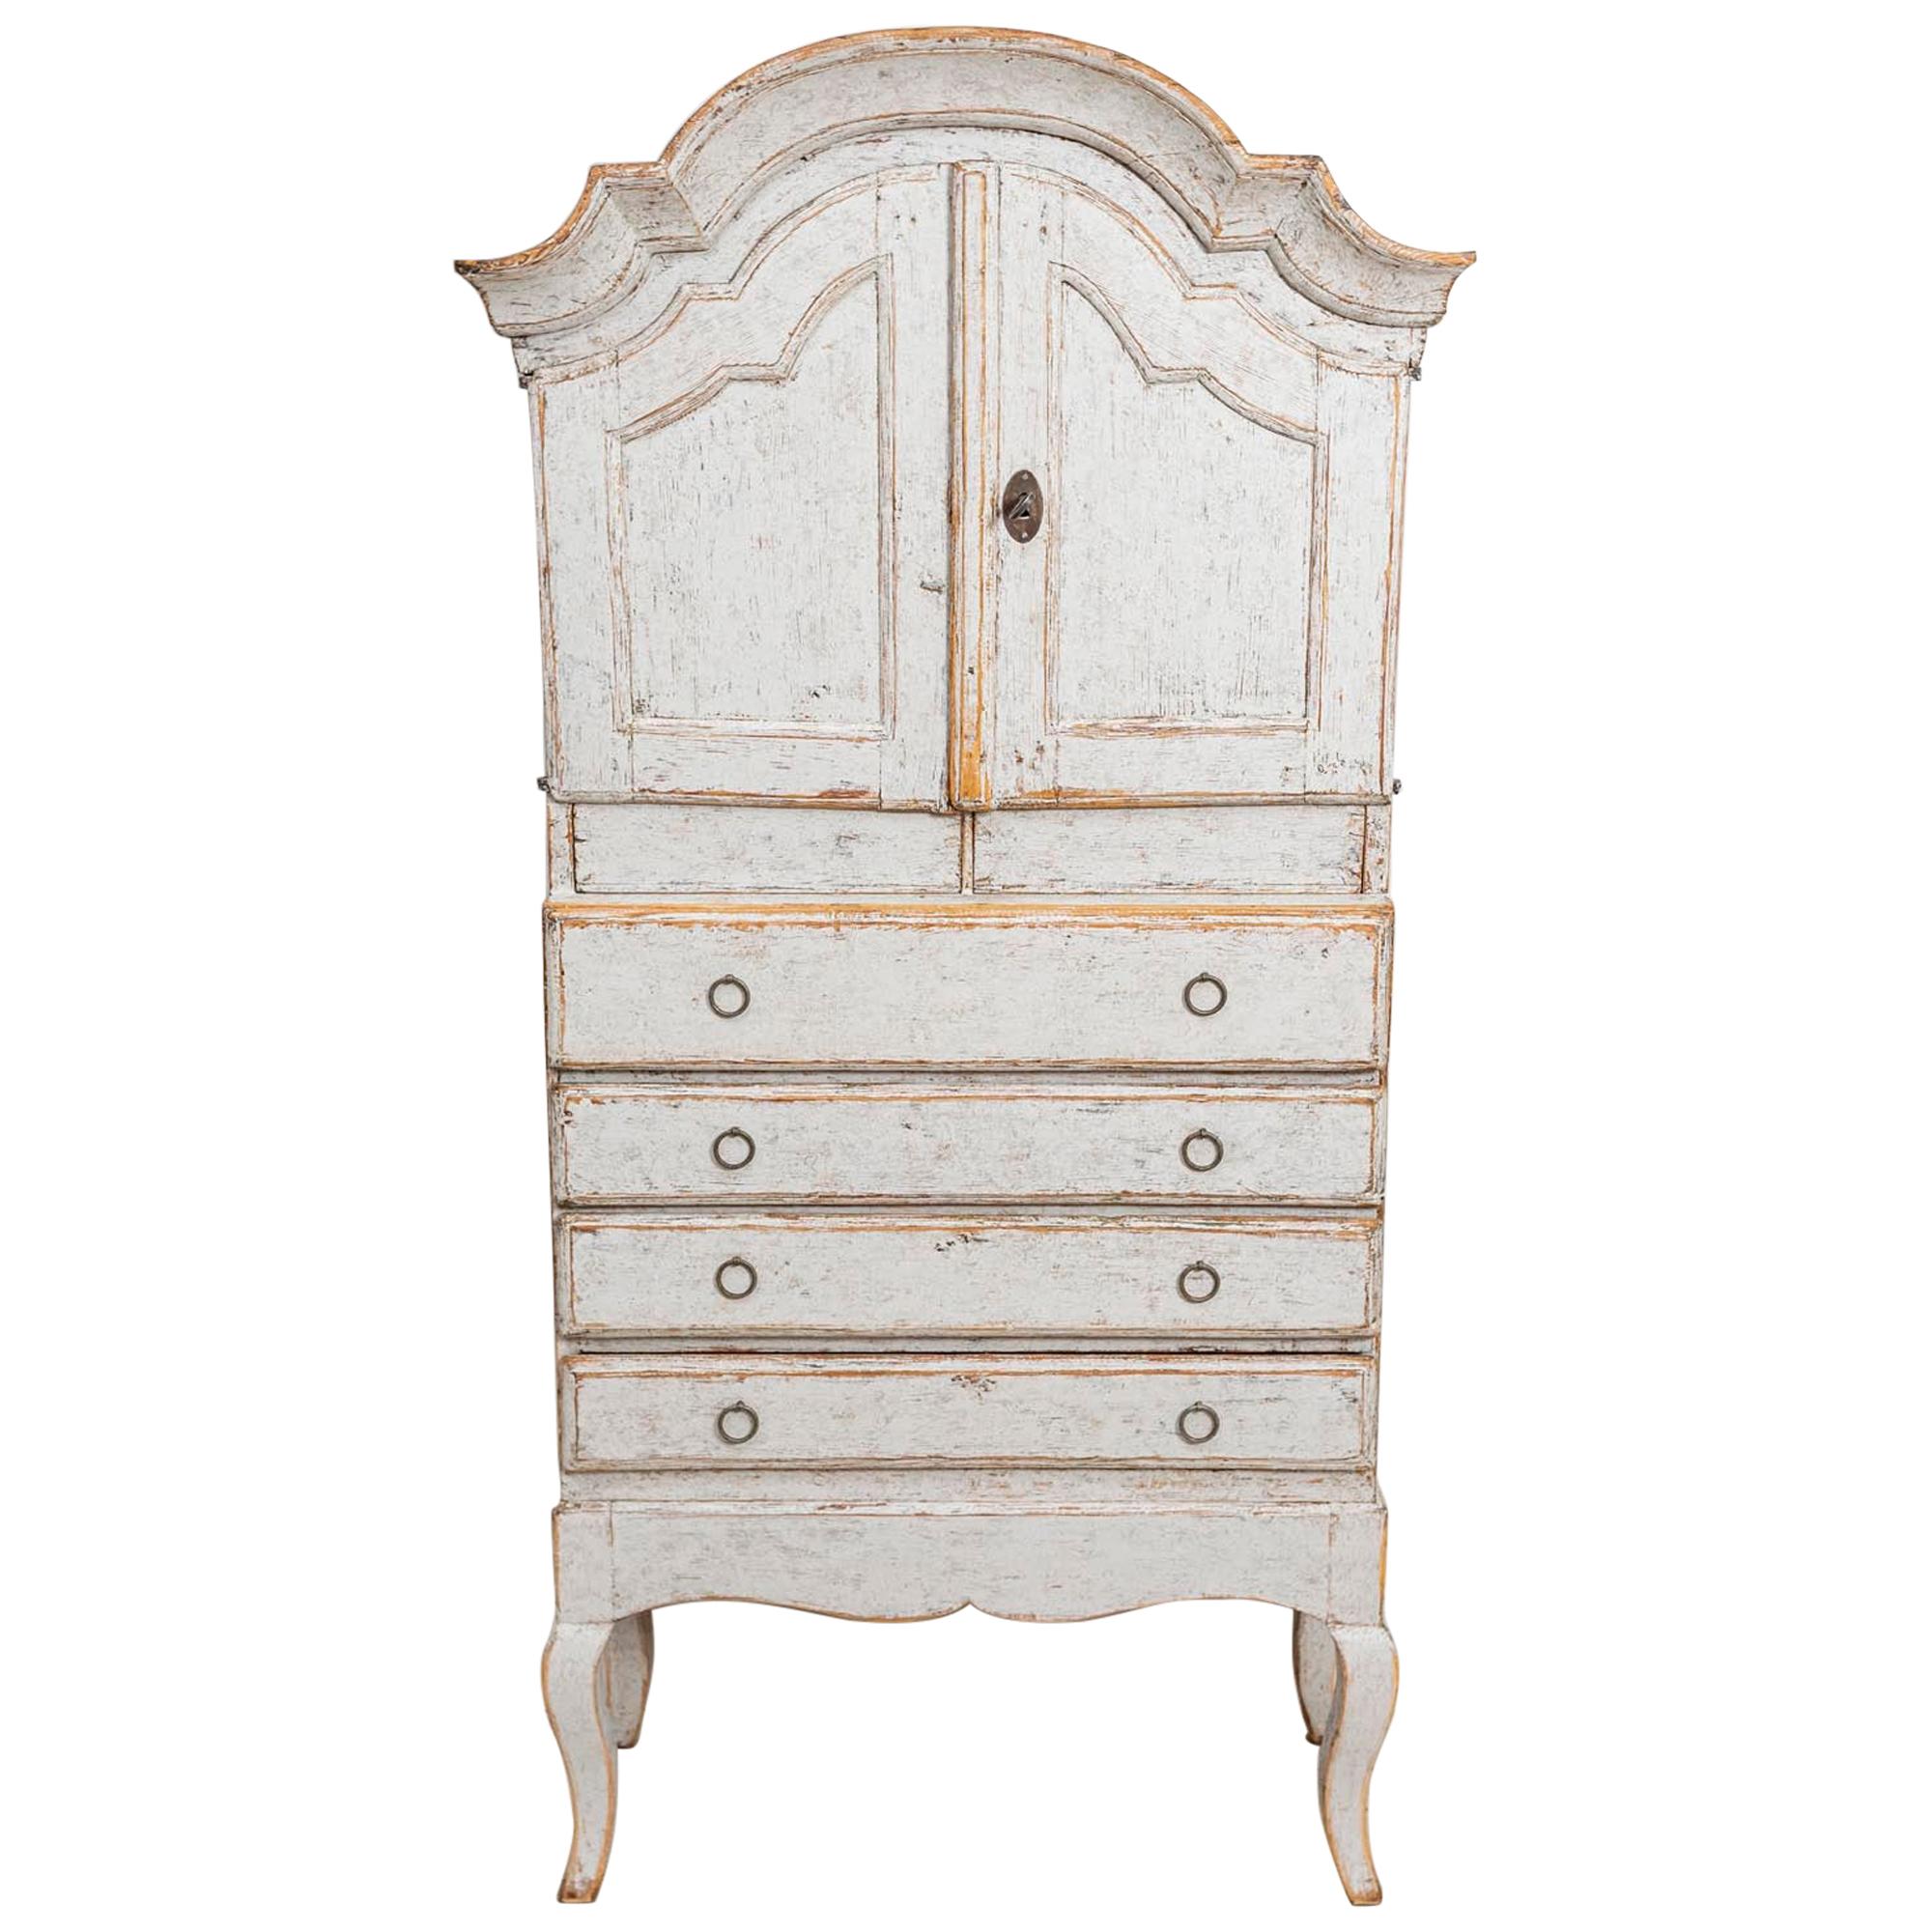 19th Century Swedish Painted Rococo Cabinet or Cupboard